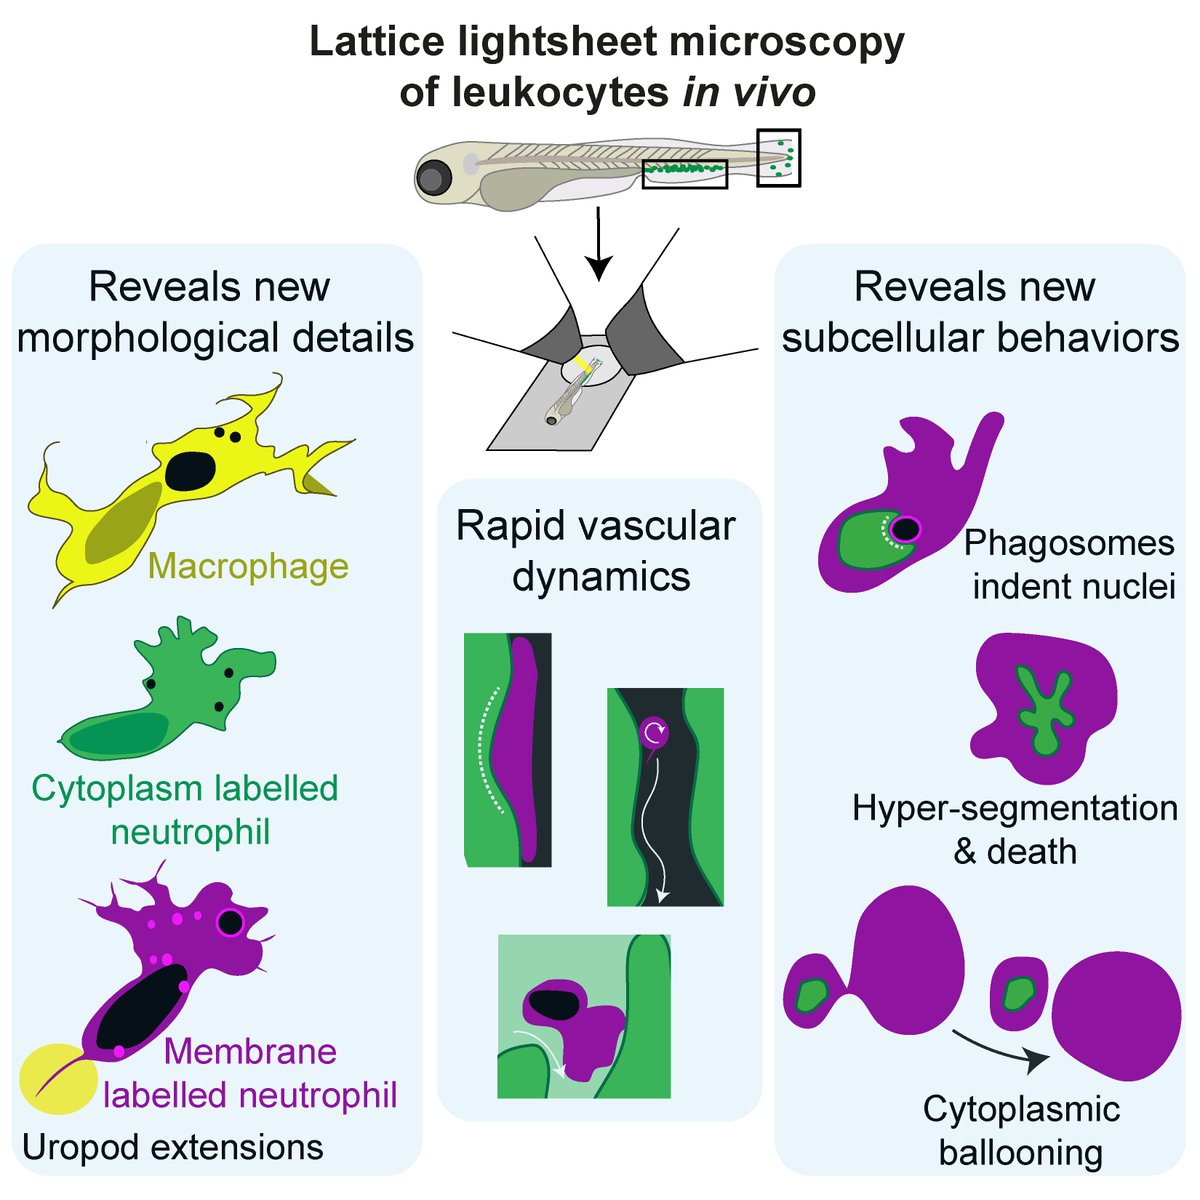 Our new paper jam-packed with exciting lattice  #lightsheet microscopy is online! Imaging  #zebrafish leukocytes, we reveal new dynamic cellular & subcellular features in vivo. At this resolution, these fast‐moving cells are captured in all their glory!/1  https://doi.org/10.1002/JLB.3HI0120-589R